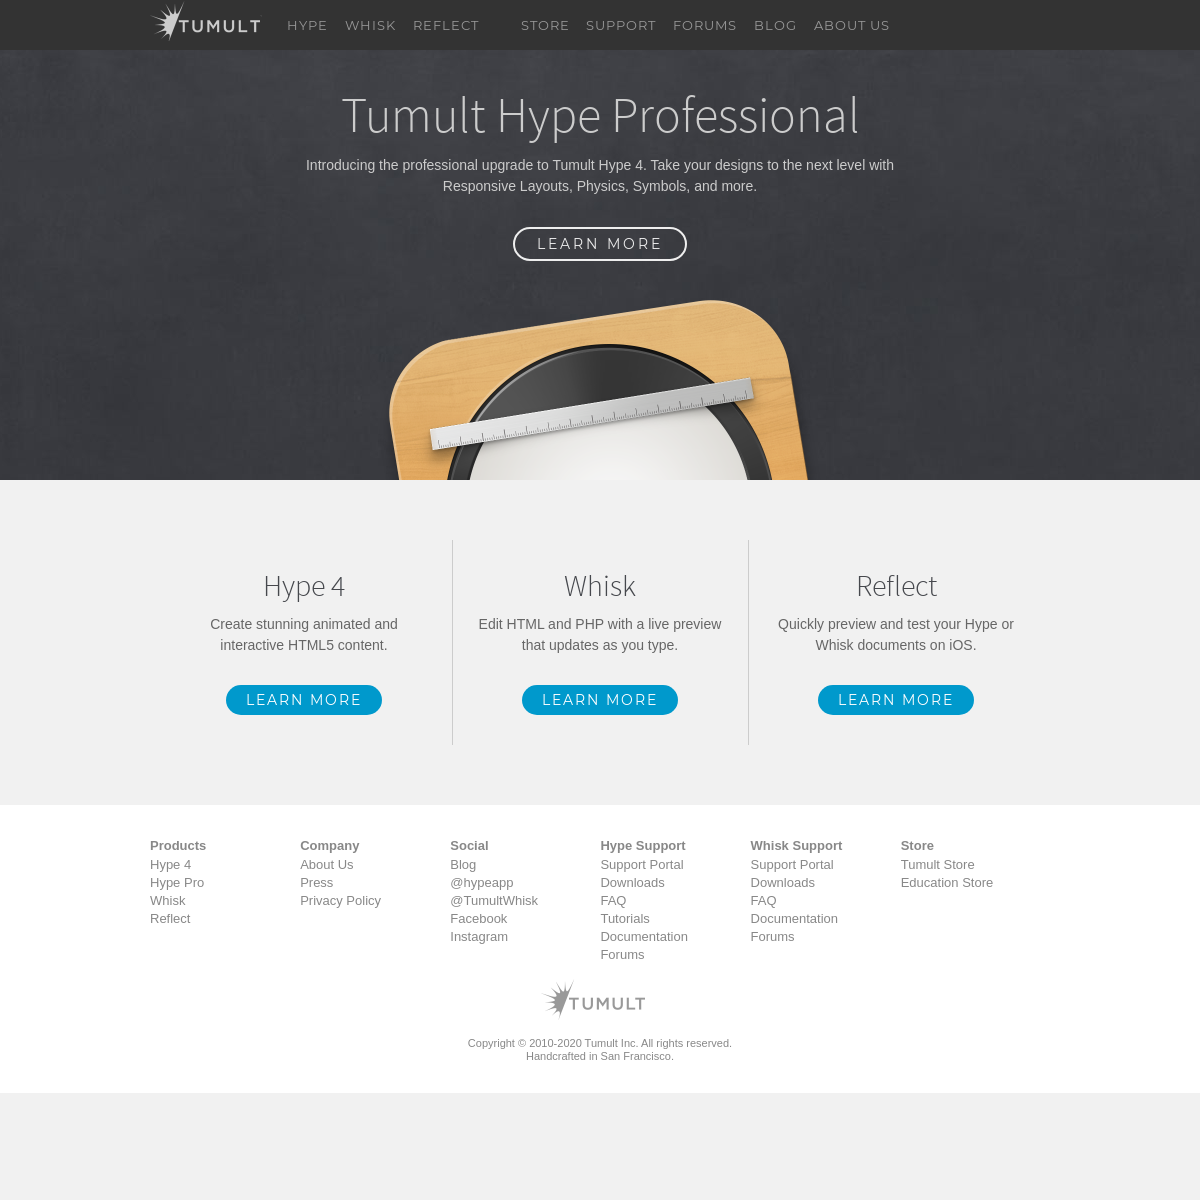 A complete backup of tumult.com